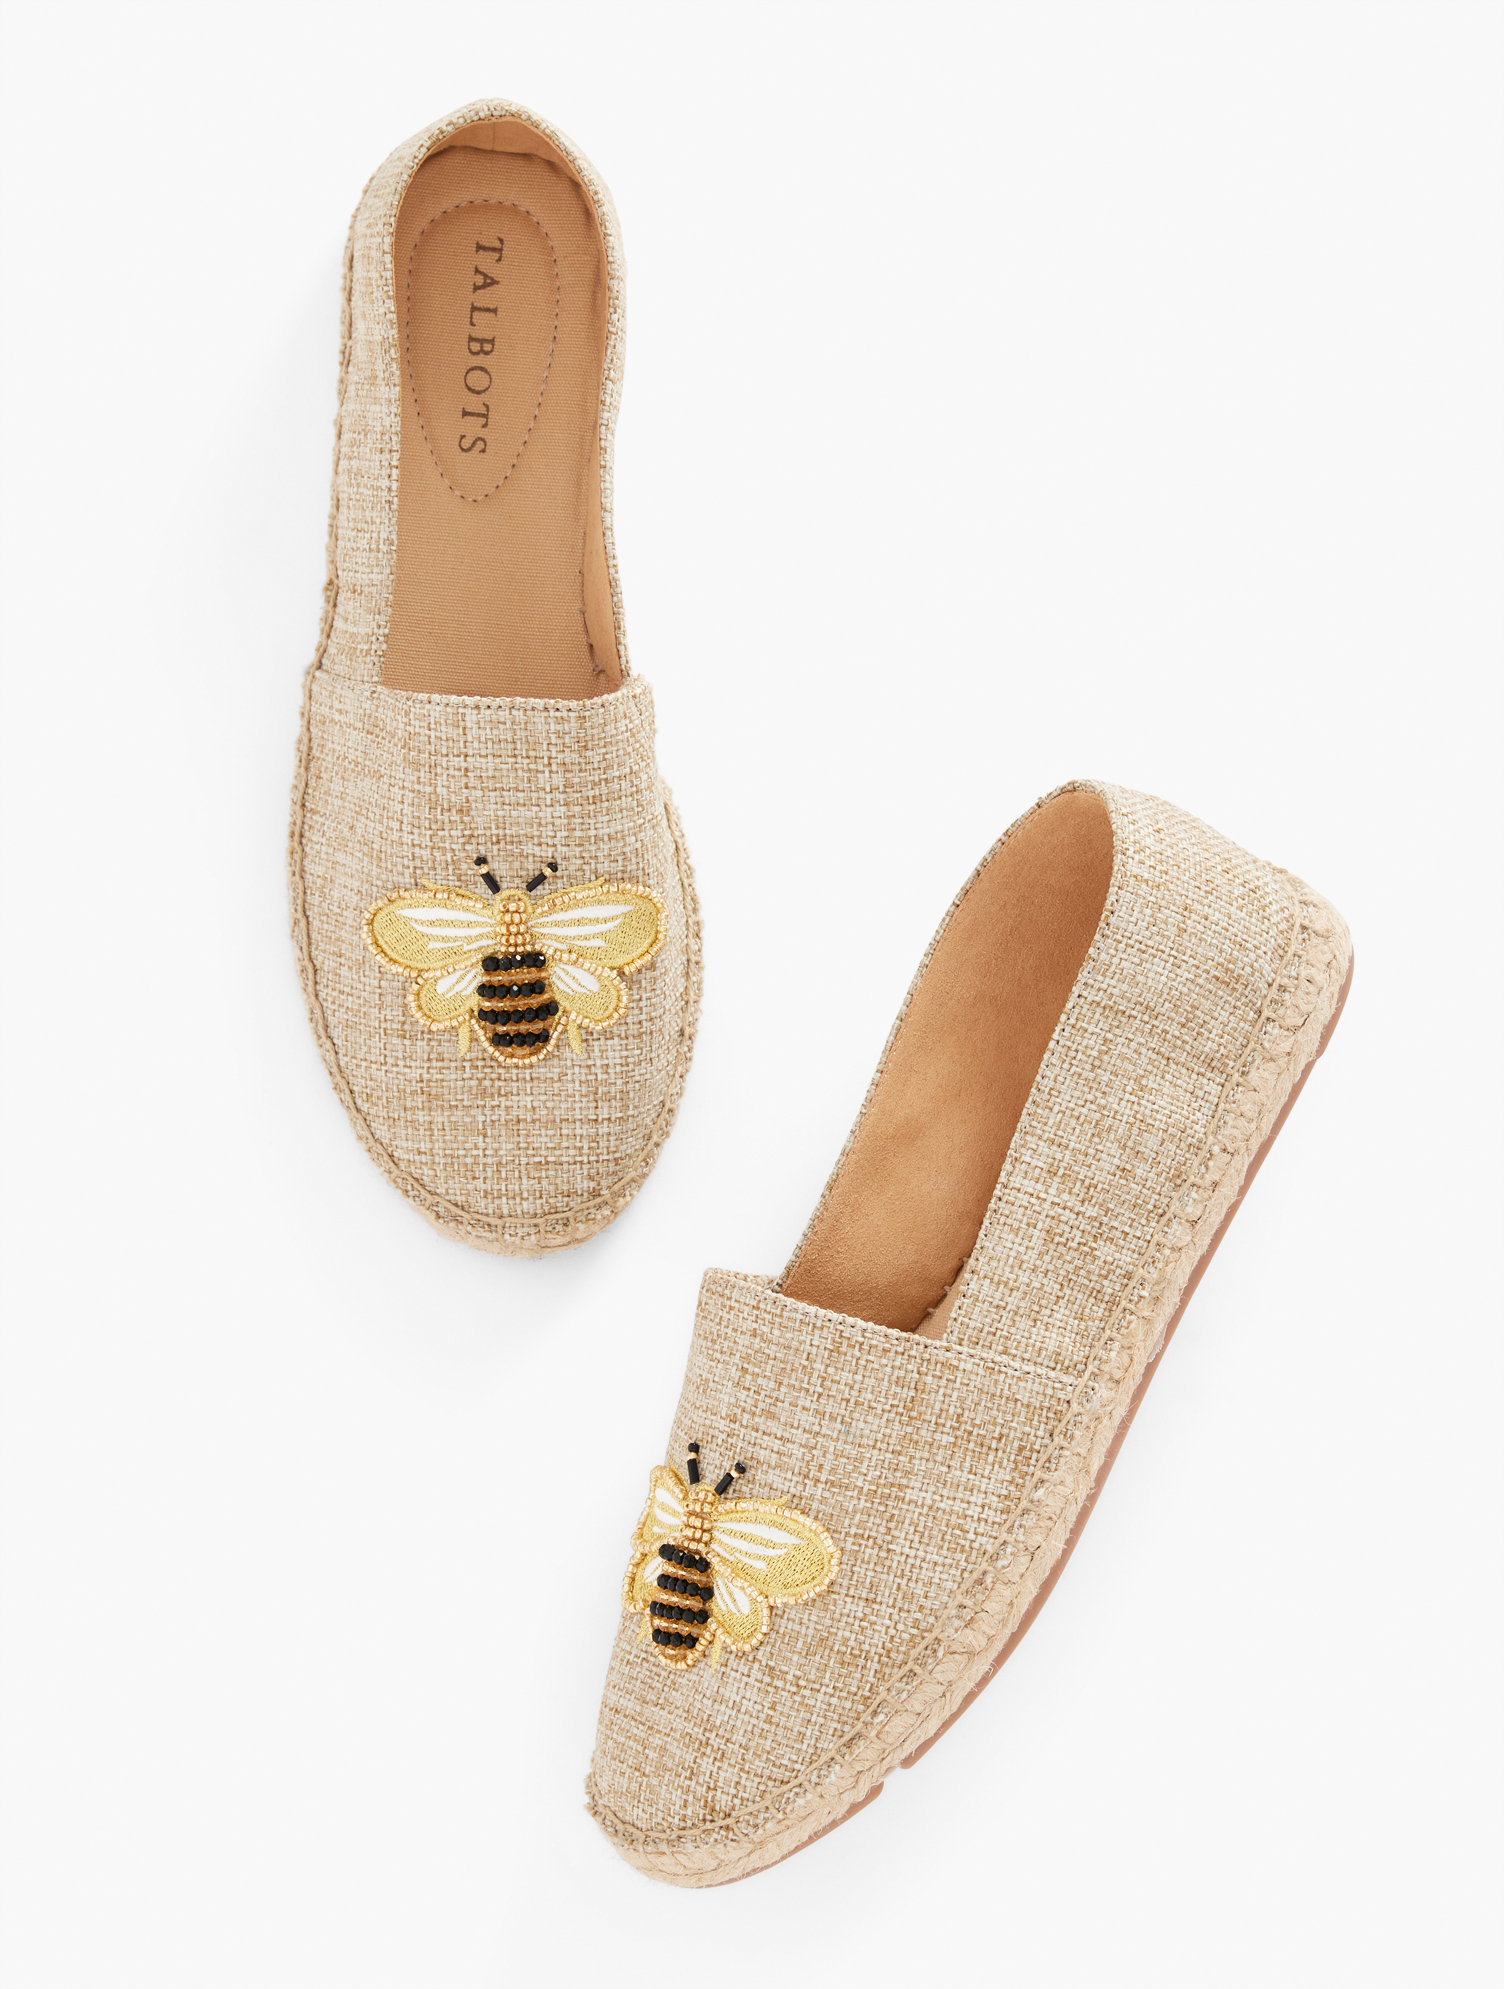 Talbots Izzy Espadrille Flats - Beaded Bee - Natural - 9 1/2 M - 100% Cotton